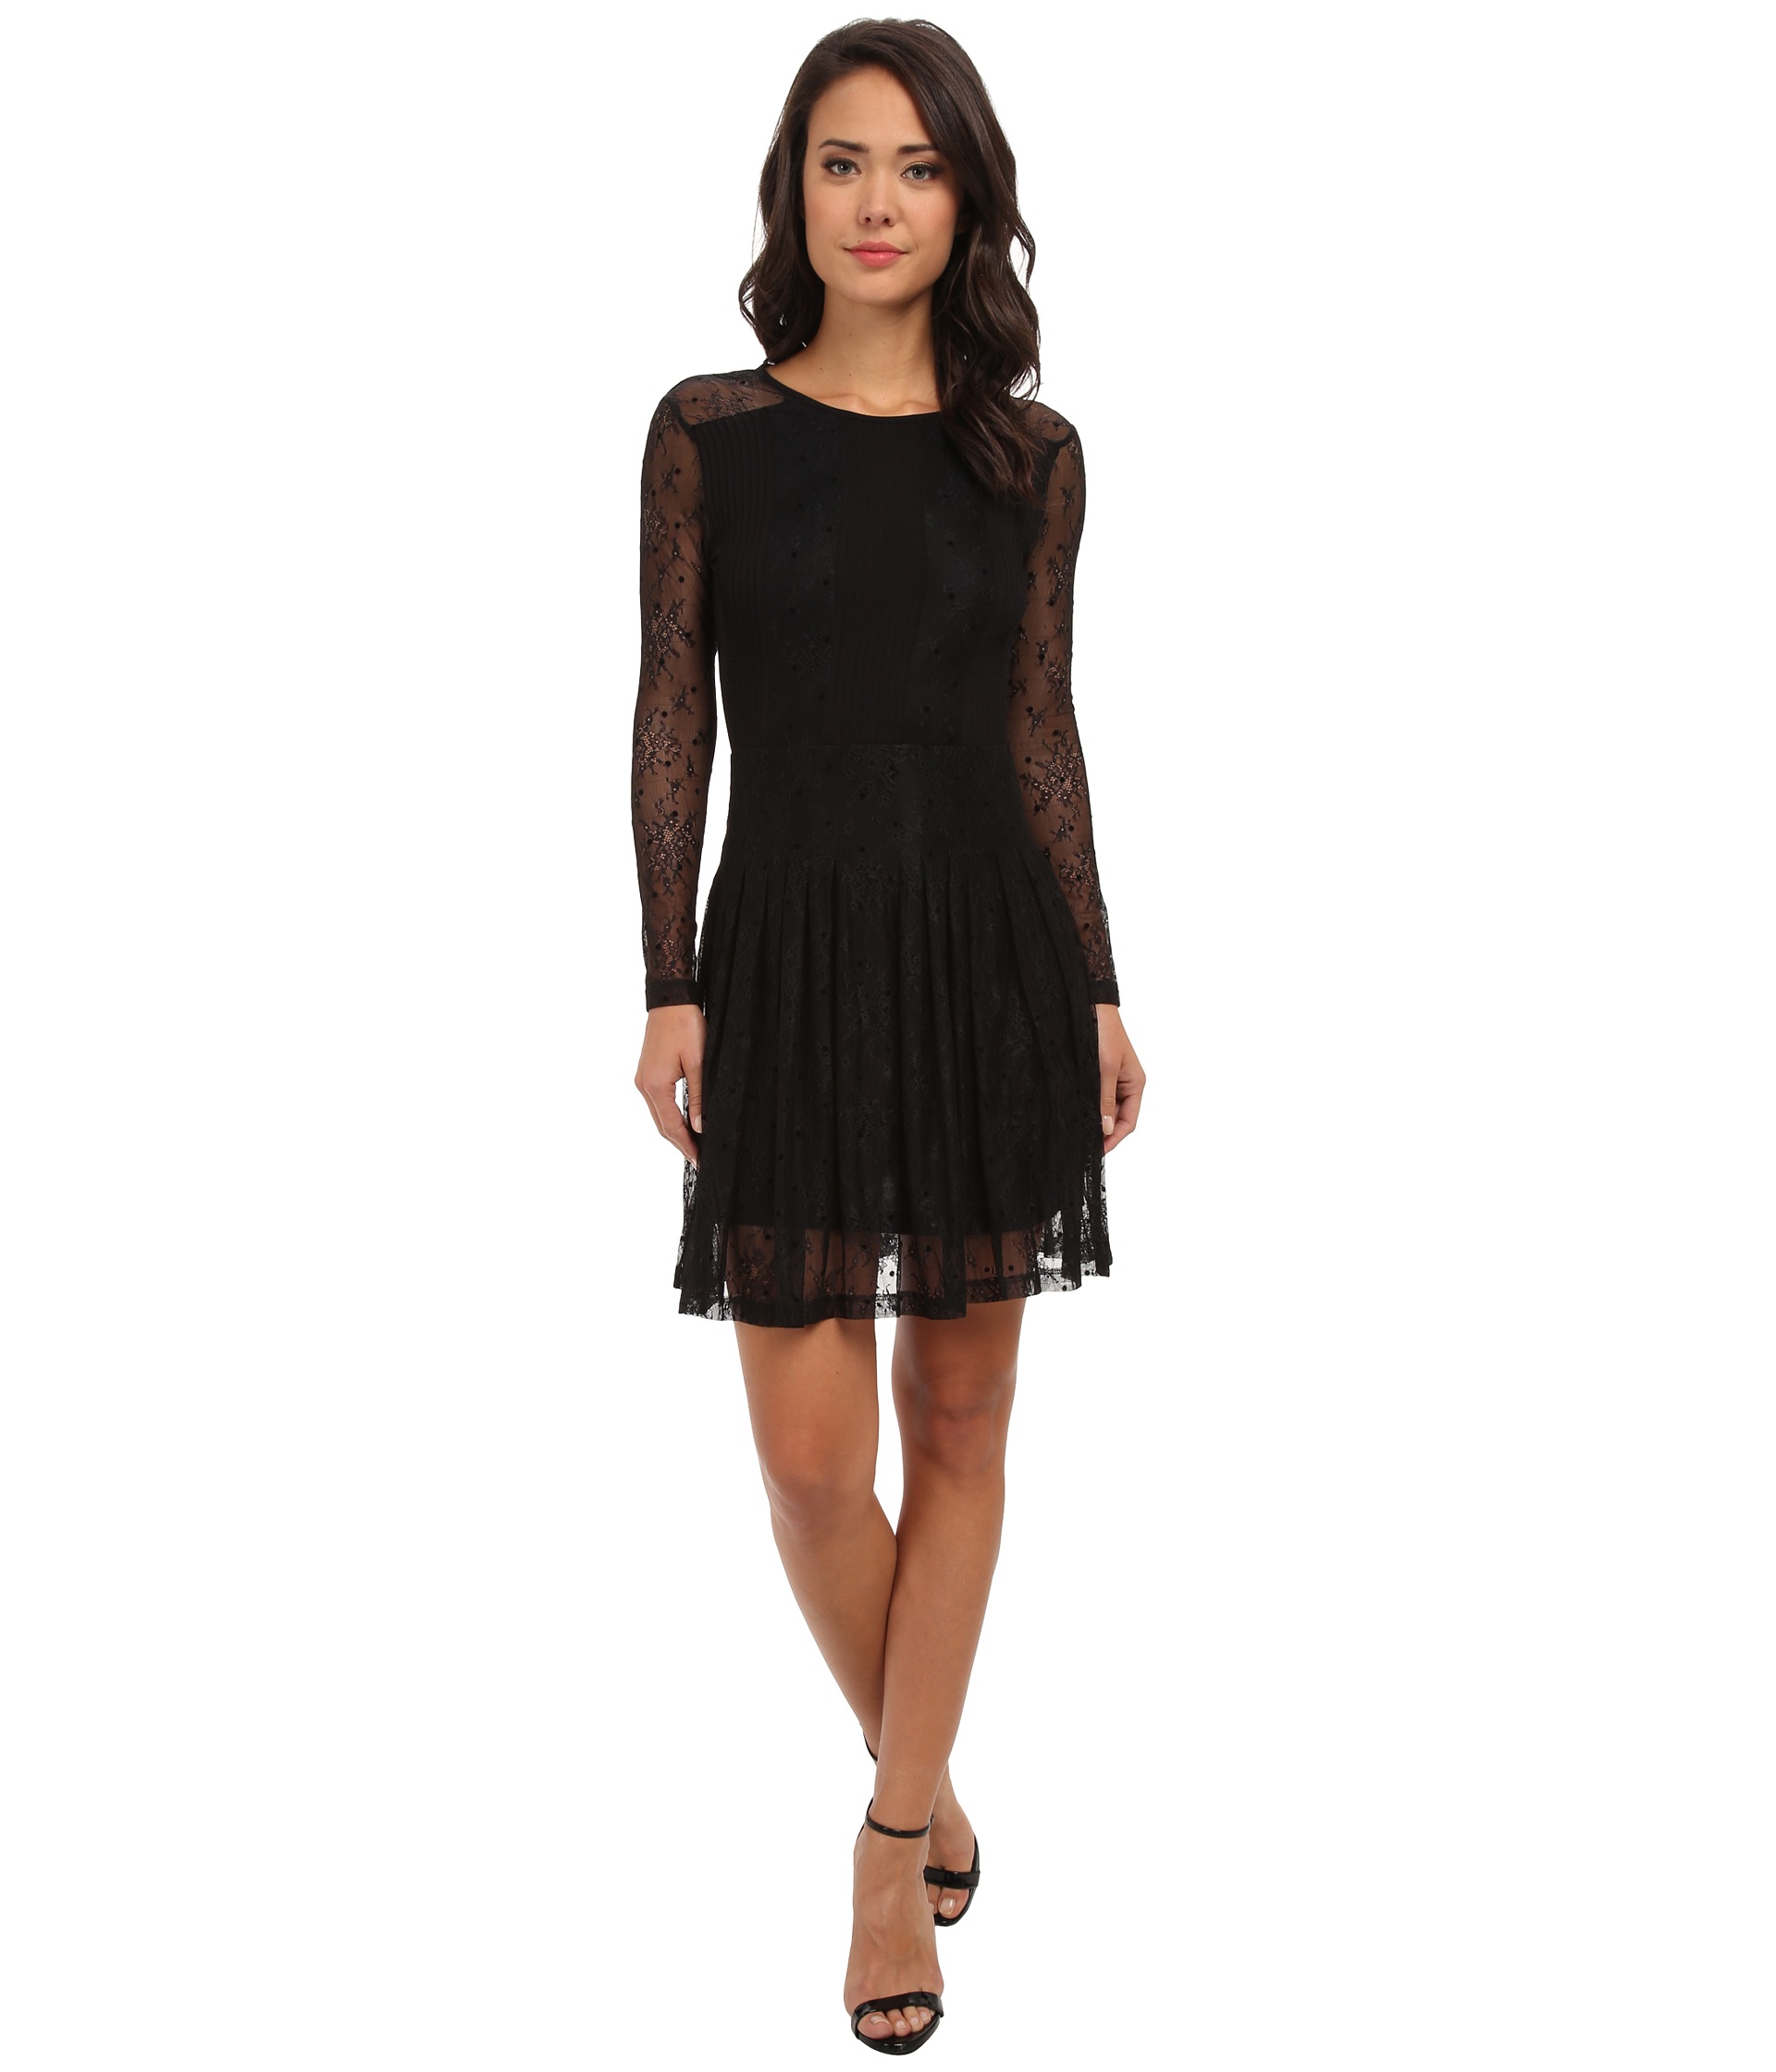 French Connection Hot Spot Lace Dress